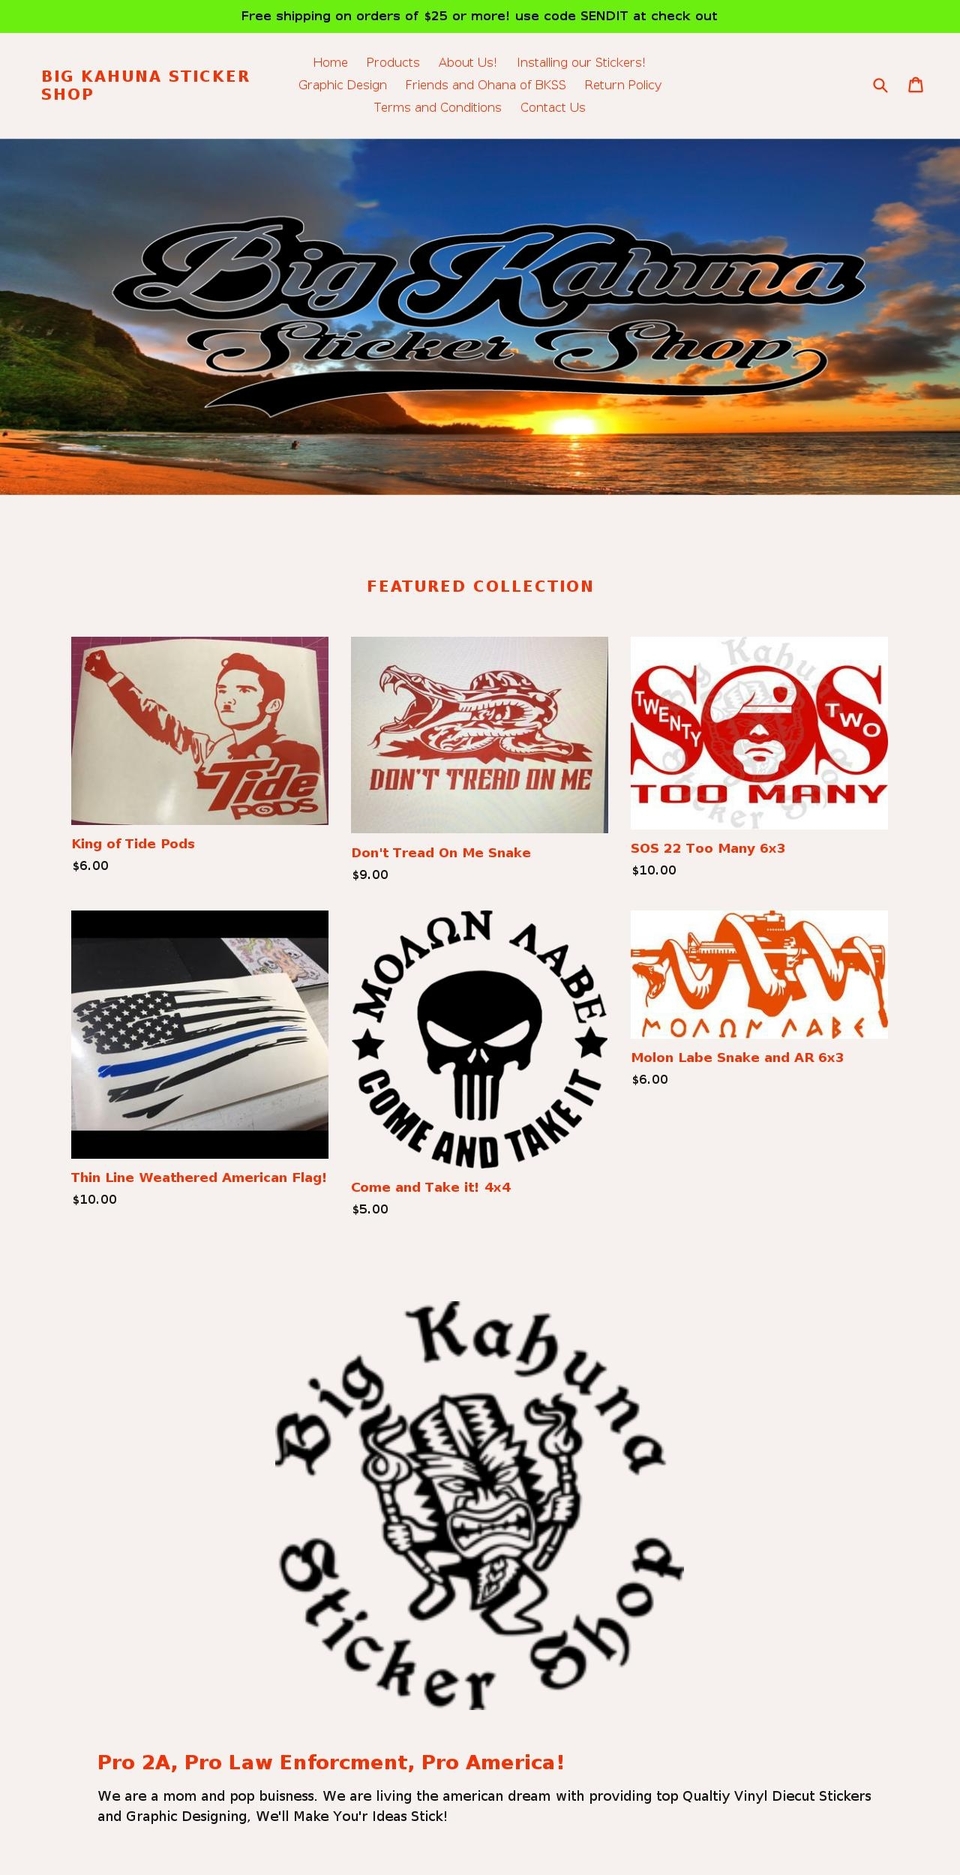 BKSS Shopify theme site example bkss305.com